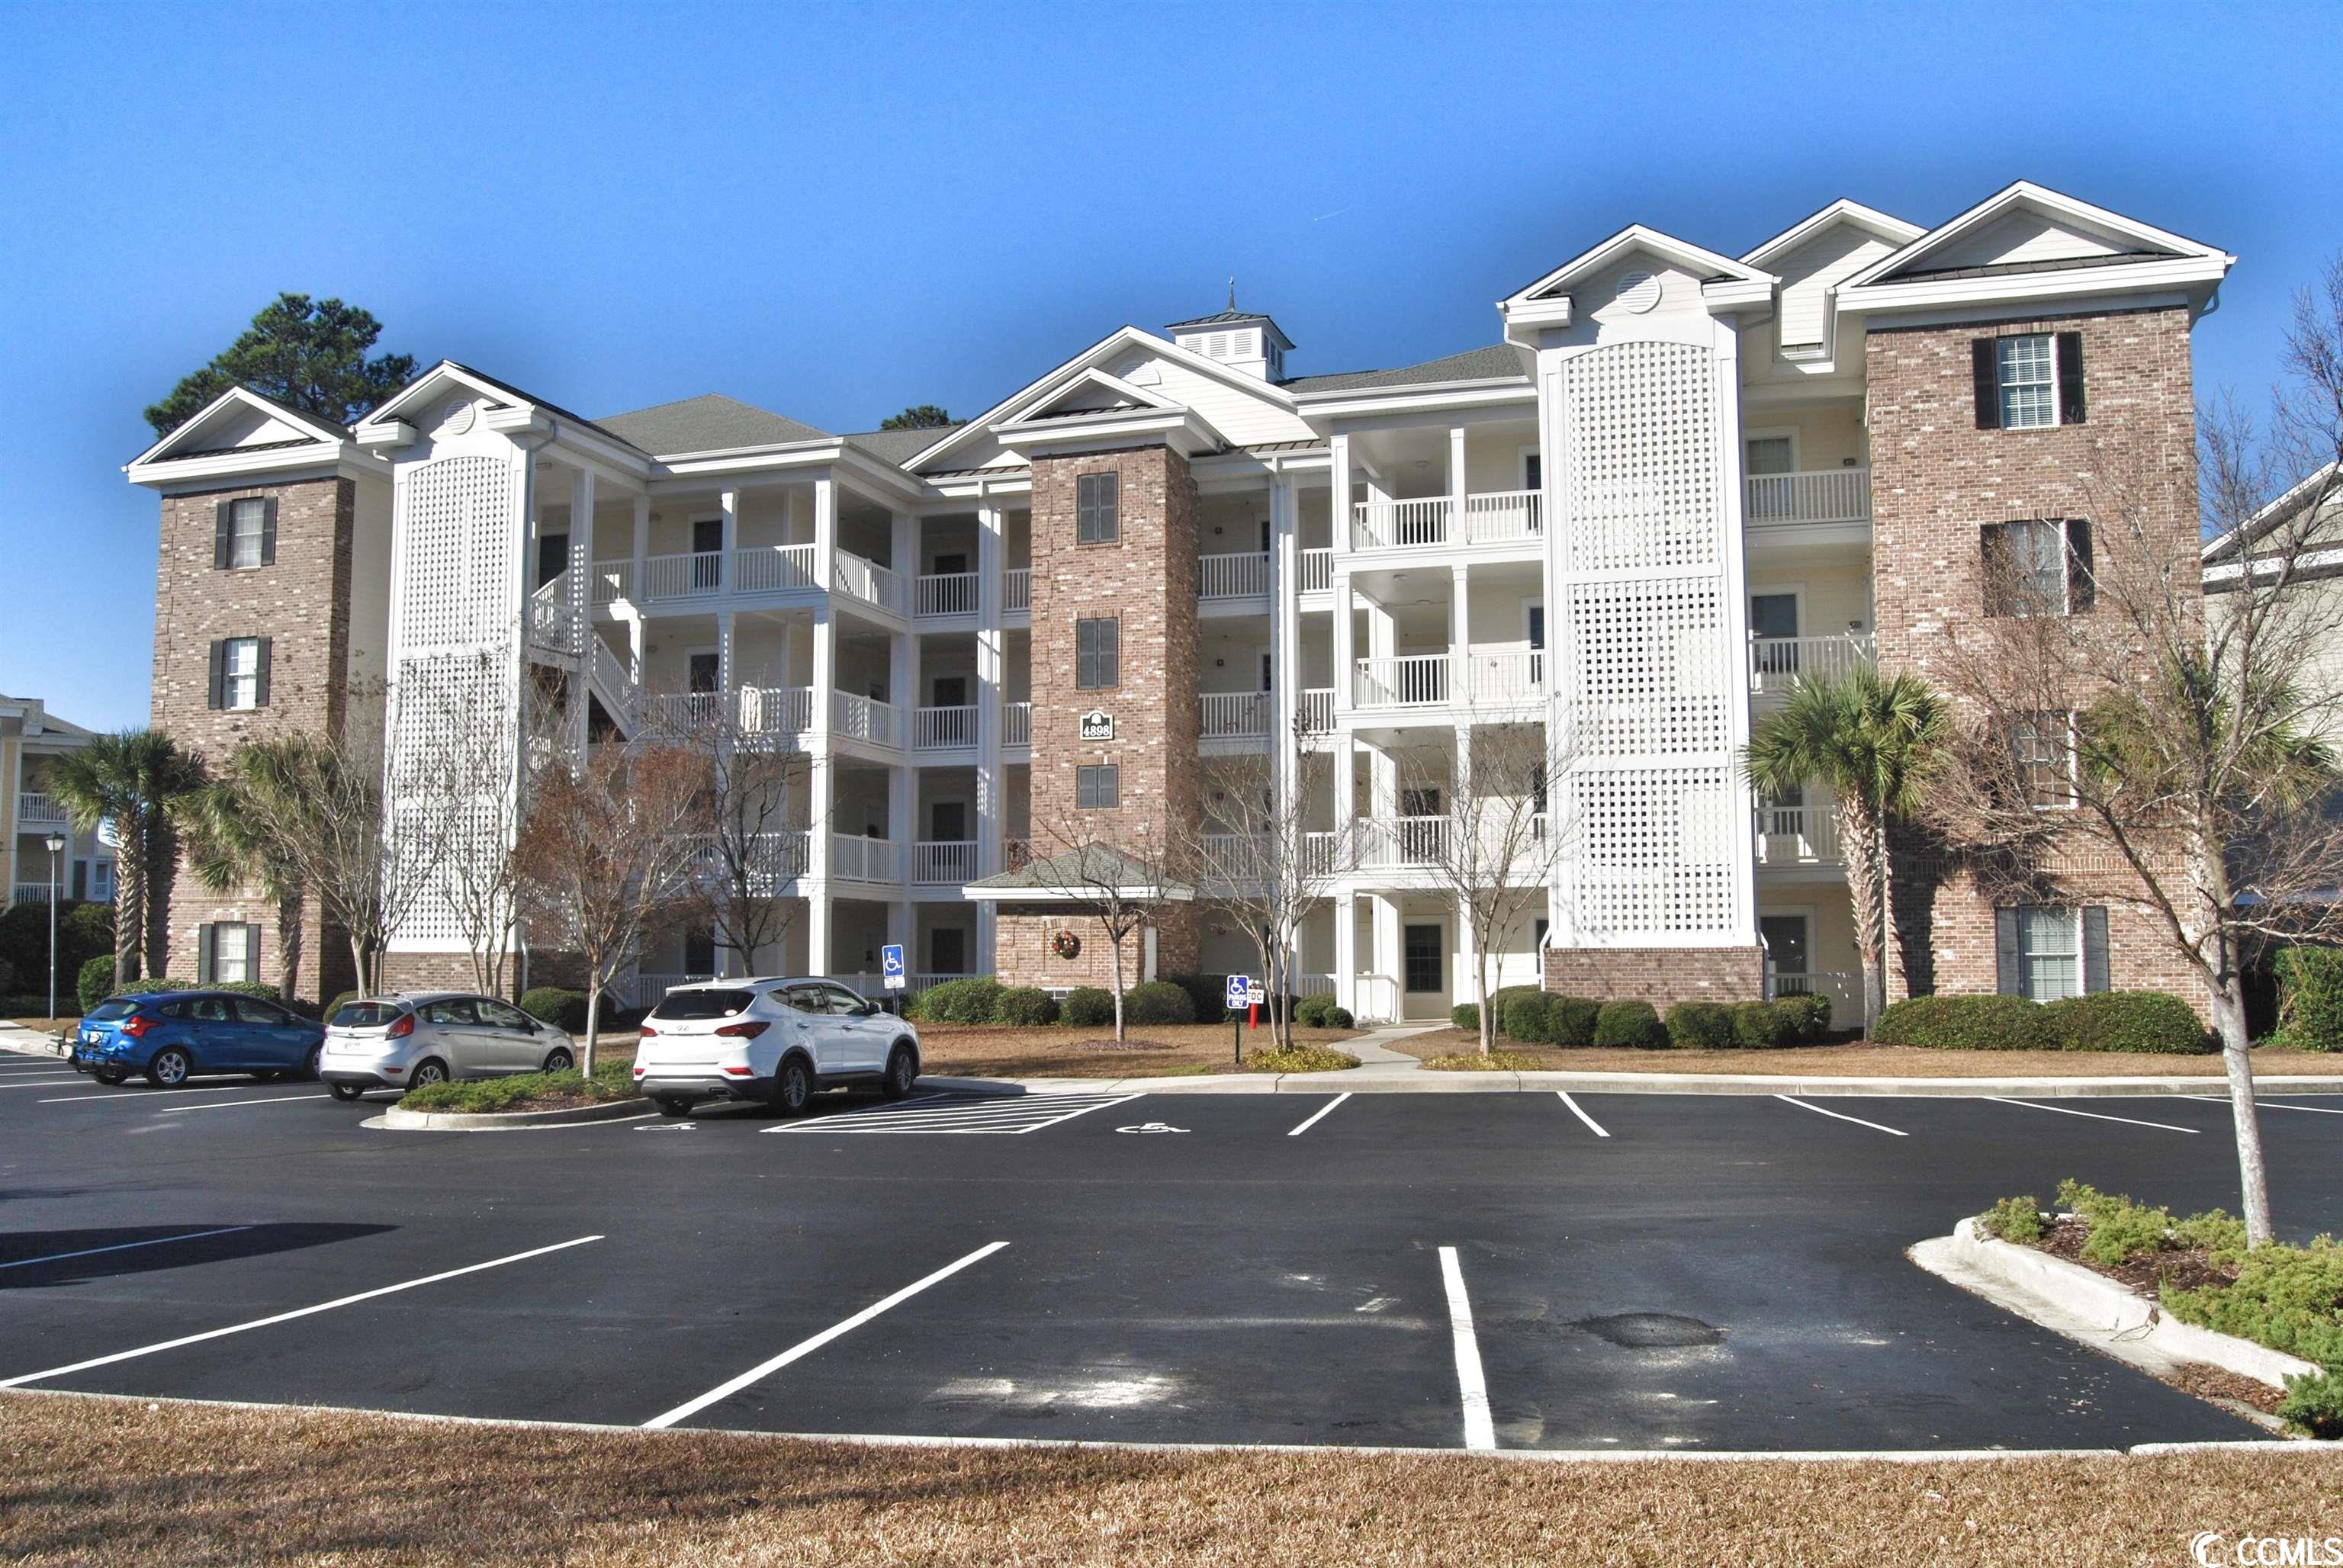 this is a 3 bedroom 2 bath condo located adjacent to myrtlewood golf course. magnolia pointe, is sought after for its location and lifestyle. you are less than a 3 minute drive to the beach, dining, entertainment, and broadway at the beach. this is one of the few complex that offers elevator services. this unit has been a second home to a wonderful family that now is looking to see another family create priceless myrtle beach memories for their family. the unit is painted a soothing sherwin williams sea salt that coordinates perfectly with any beachy decor. the hvac and hot water heater have been replaced in the past 3 years. the convenience of this first floor unit makes it extra desireable. from the time you come in the door you are amazed by the spacious open floor plan. the condo is so thoughtfully layed out to provide the maximum amount of privcay. the backporch has been converted into a four-season rooms that gives you year round enjoyment of this space. conveniently walk out to enjoy the sprawling community lawn and adjacent pool just steps from your back door. this unit will not disappoint. it is upfitted with two king size beds and two twin beds. don't miss out on your opportunity to own this gem.